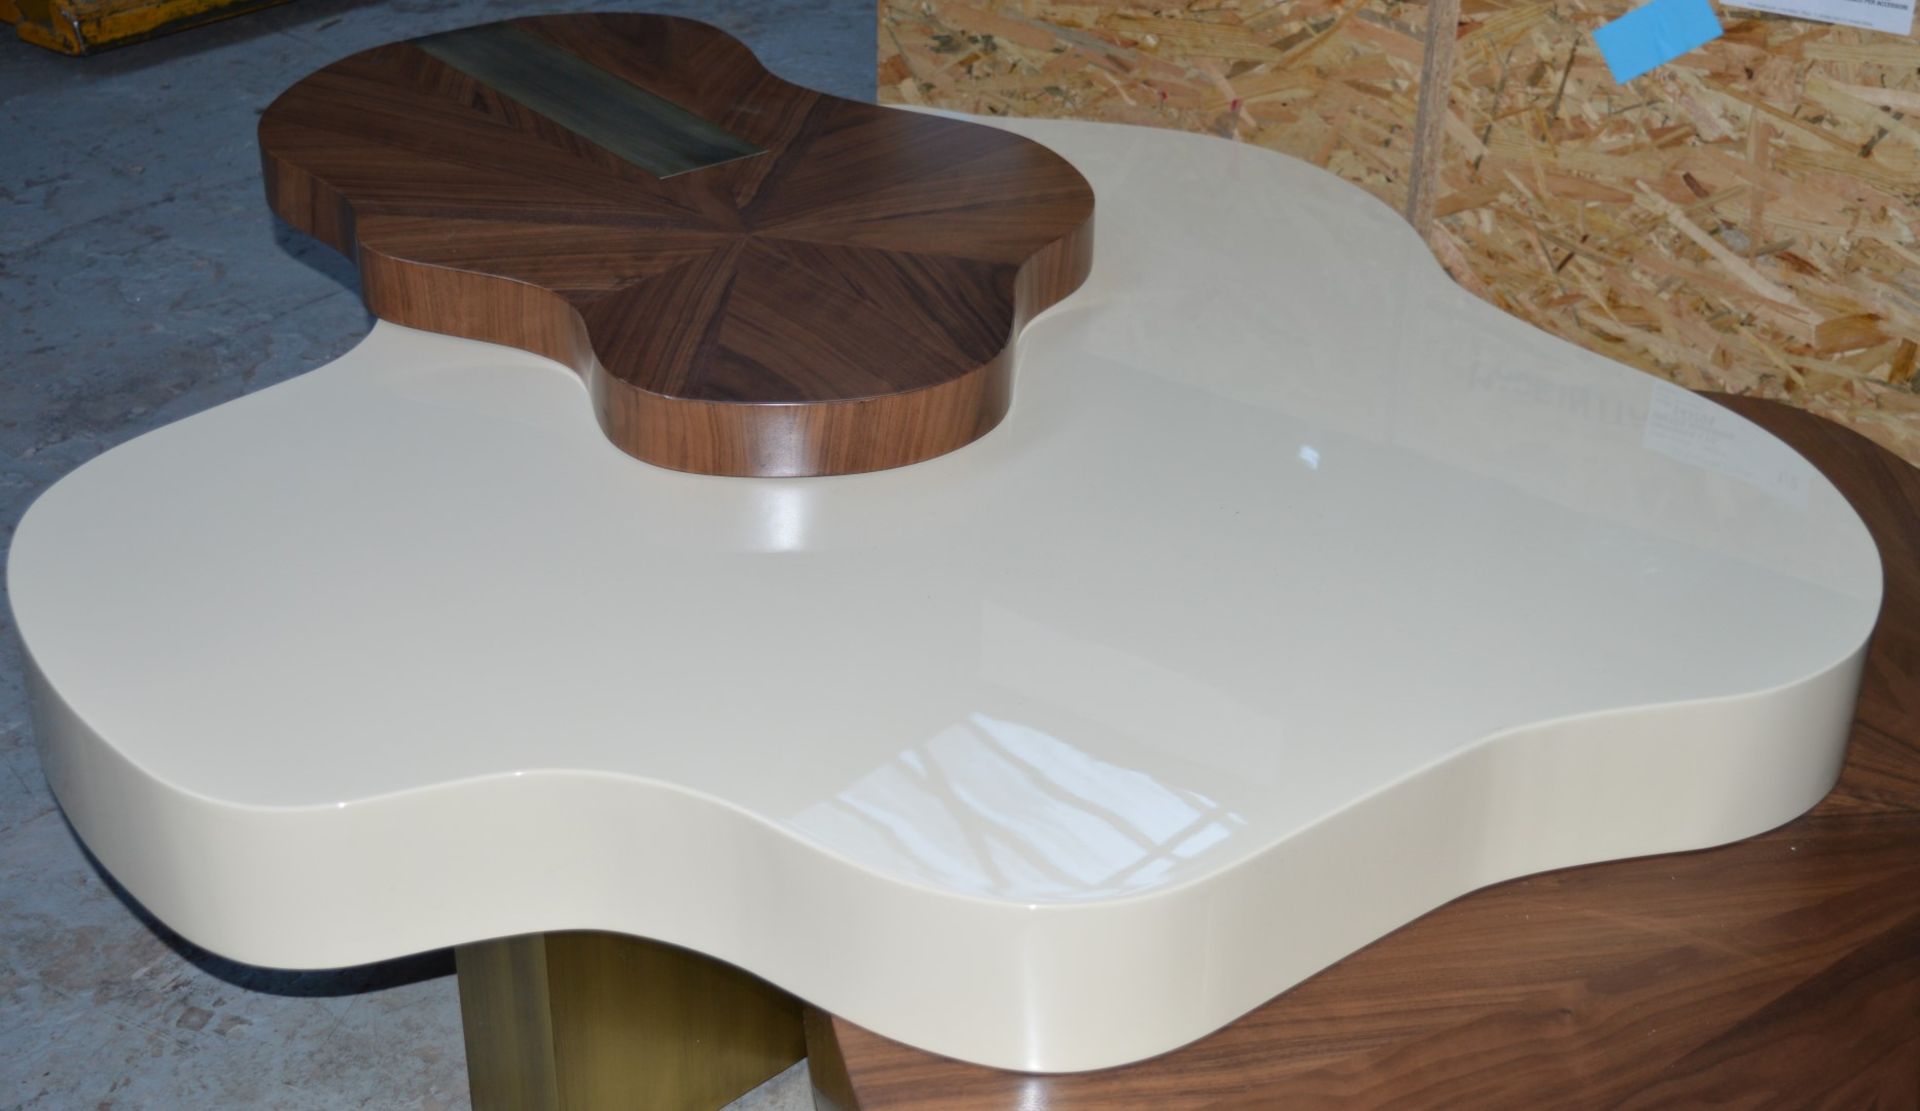 1 x Ginger & Jagger Nenhuphar Coffee Table - Urbanmint Design - Eye Catching Design - Walnut and - Image 9 of 15